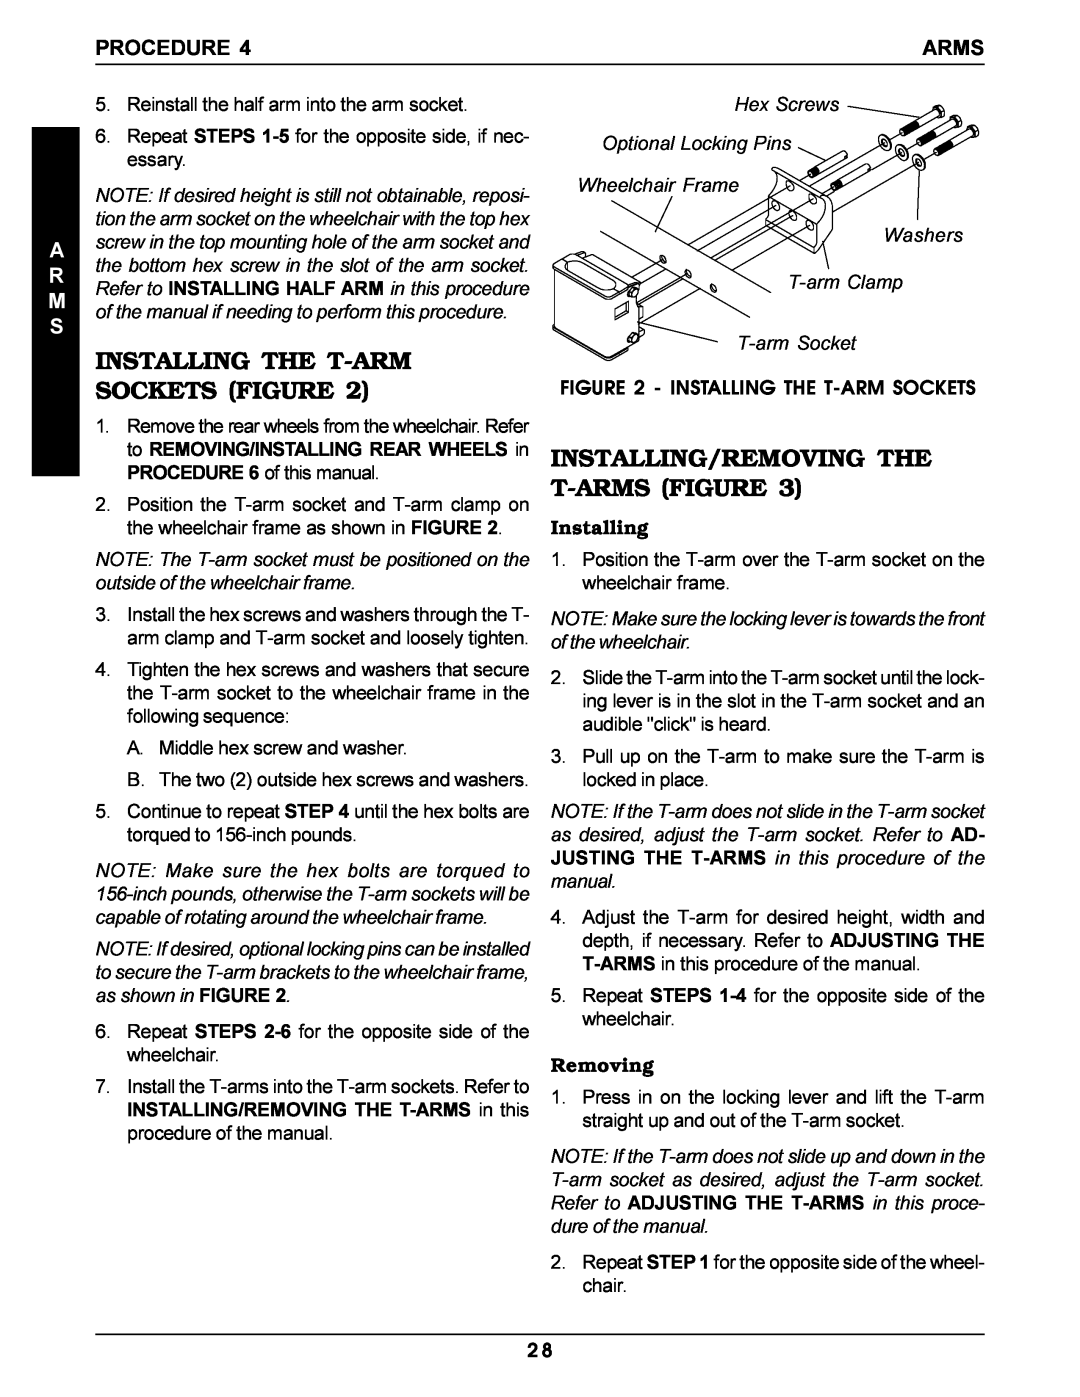 Invacare Pro Series manual Installing The T-Arm Sockets Figure, Installing/Removing The T-Arms Figure, Procedure, A R M S 